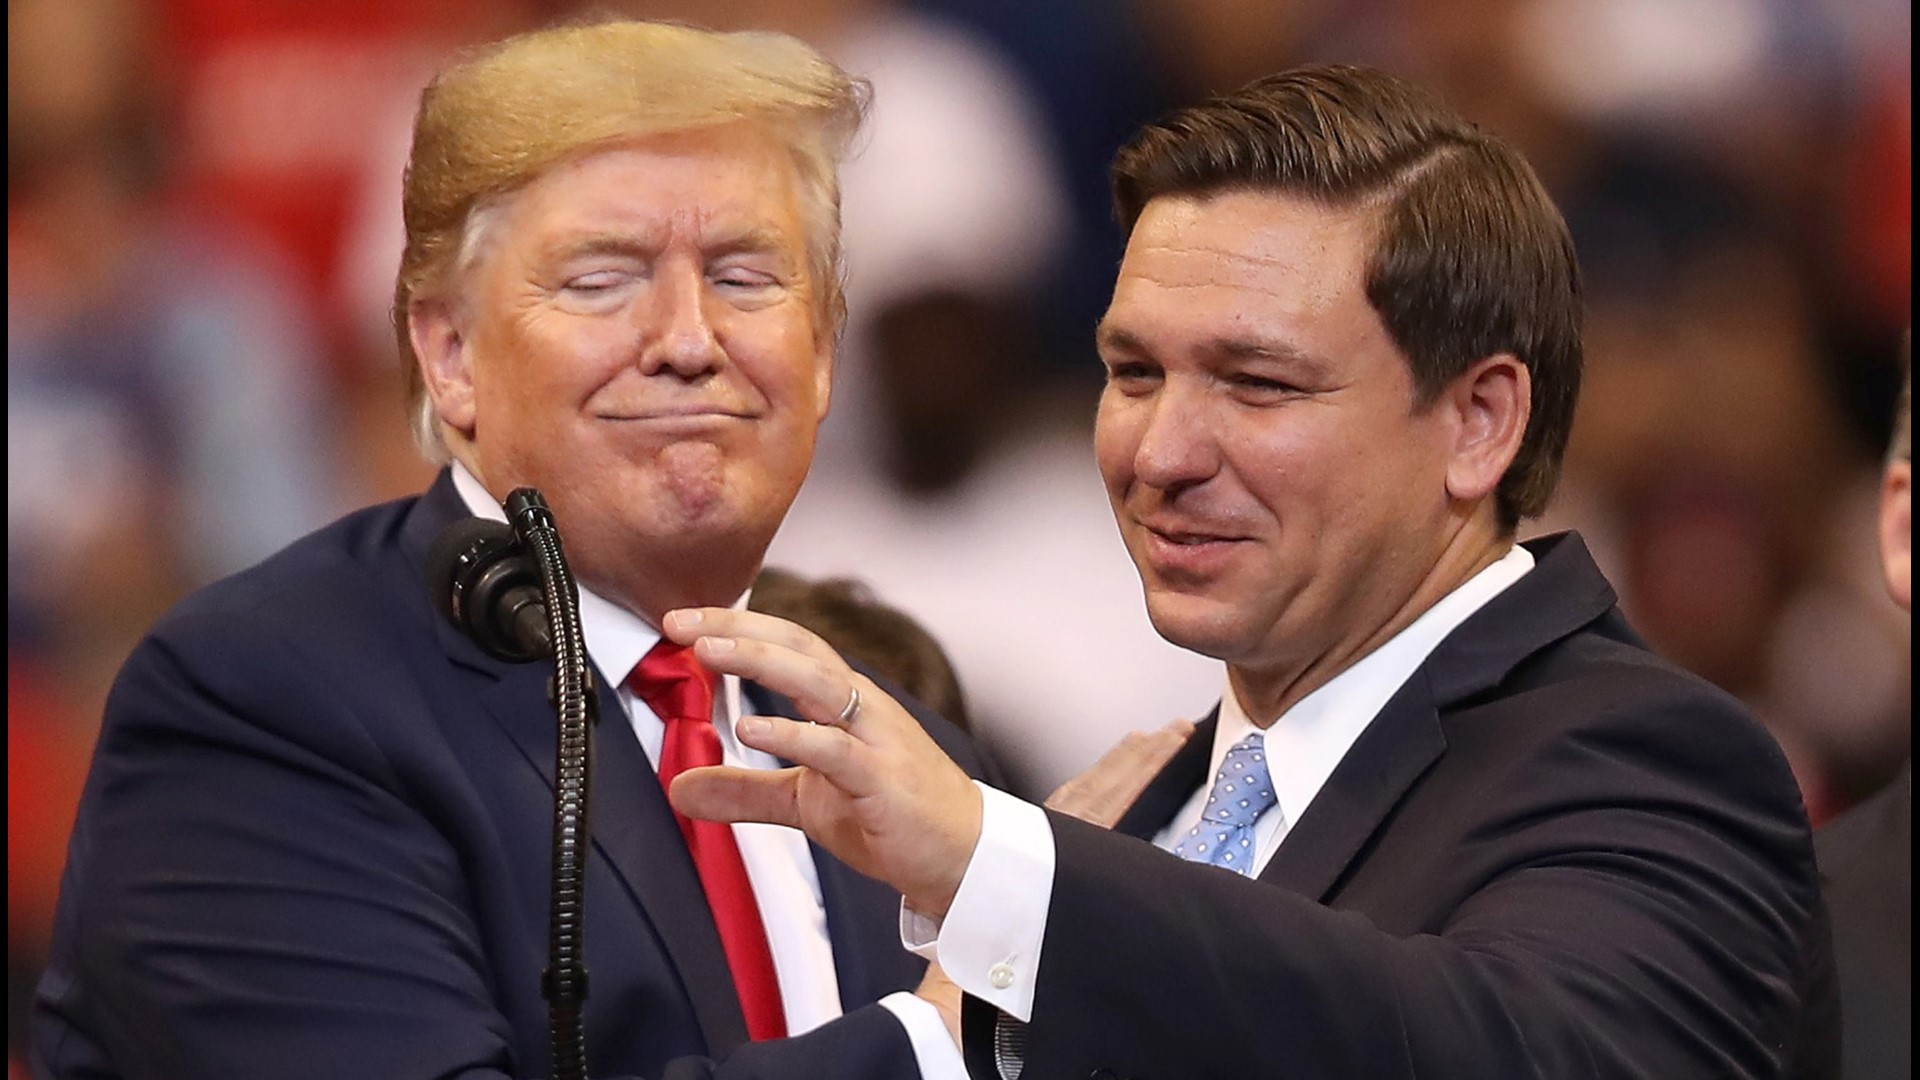 Former President Donald Trump said he would beat Florida Gov. Ron DeSantis if they went head to head in the 2024 primary. Veuer's Maria Mercedes Galuppo has the story.